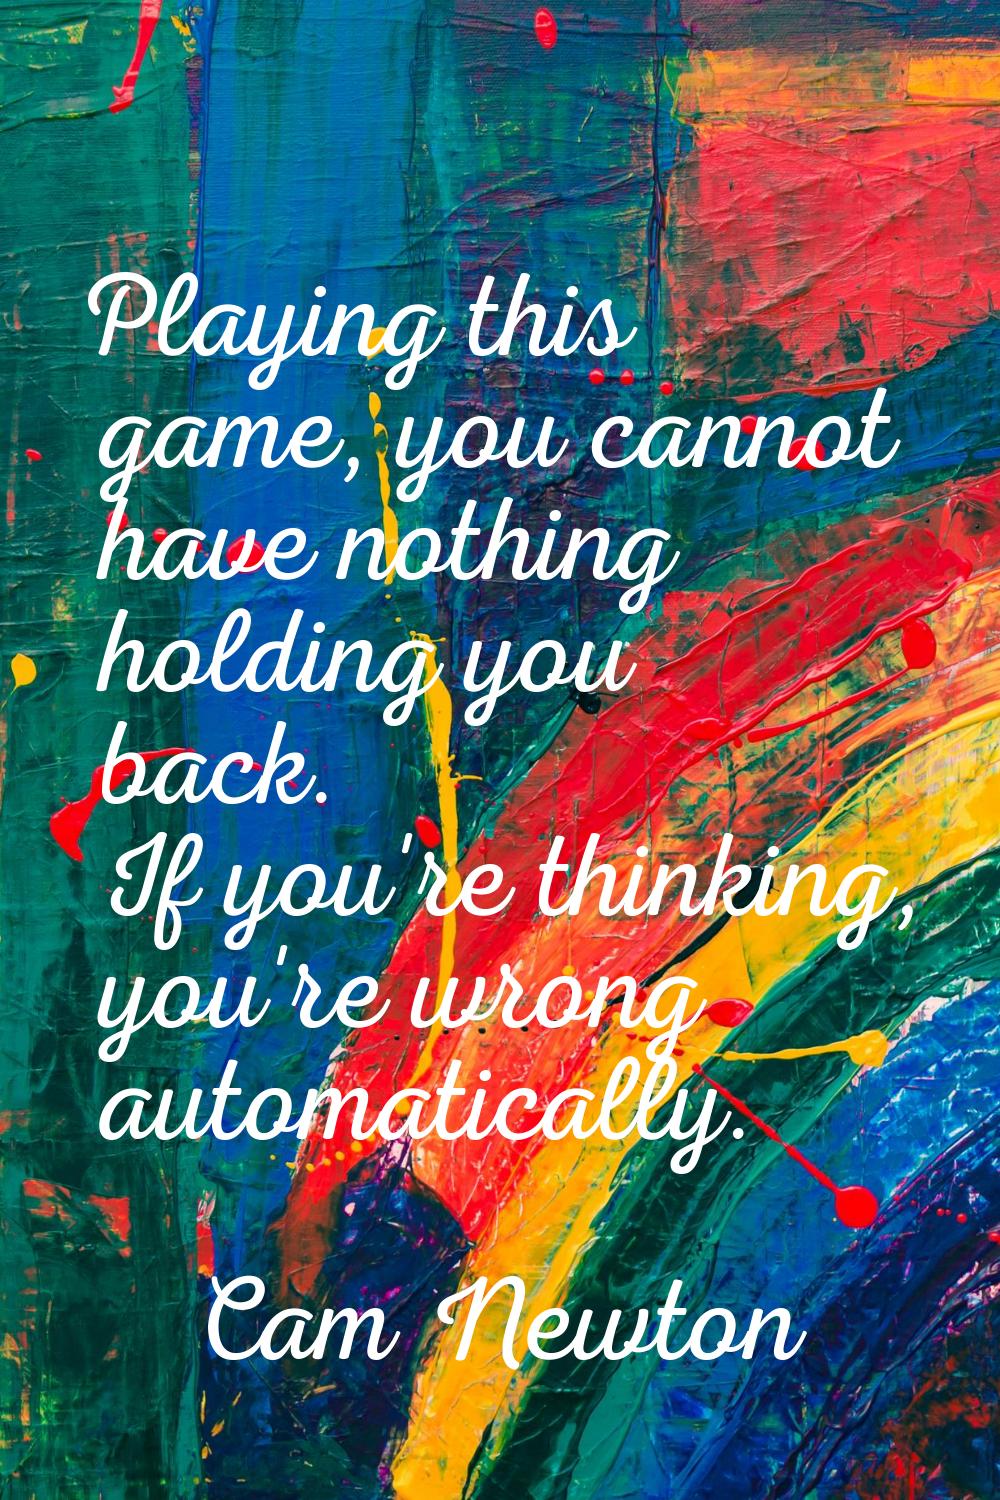 Playing this game, you cannot have nothing holding you back. If you're thinking, you're wrong autom